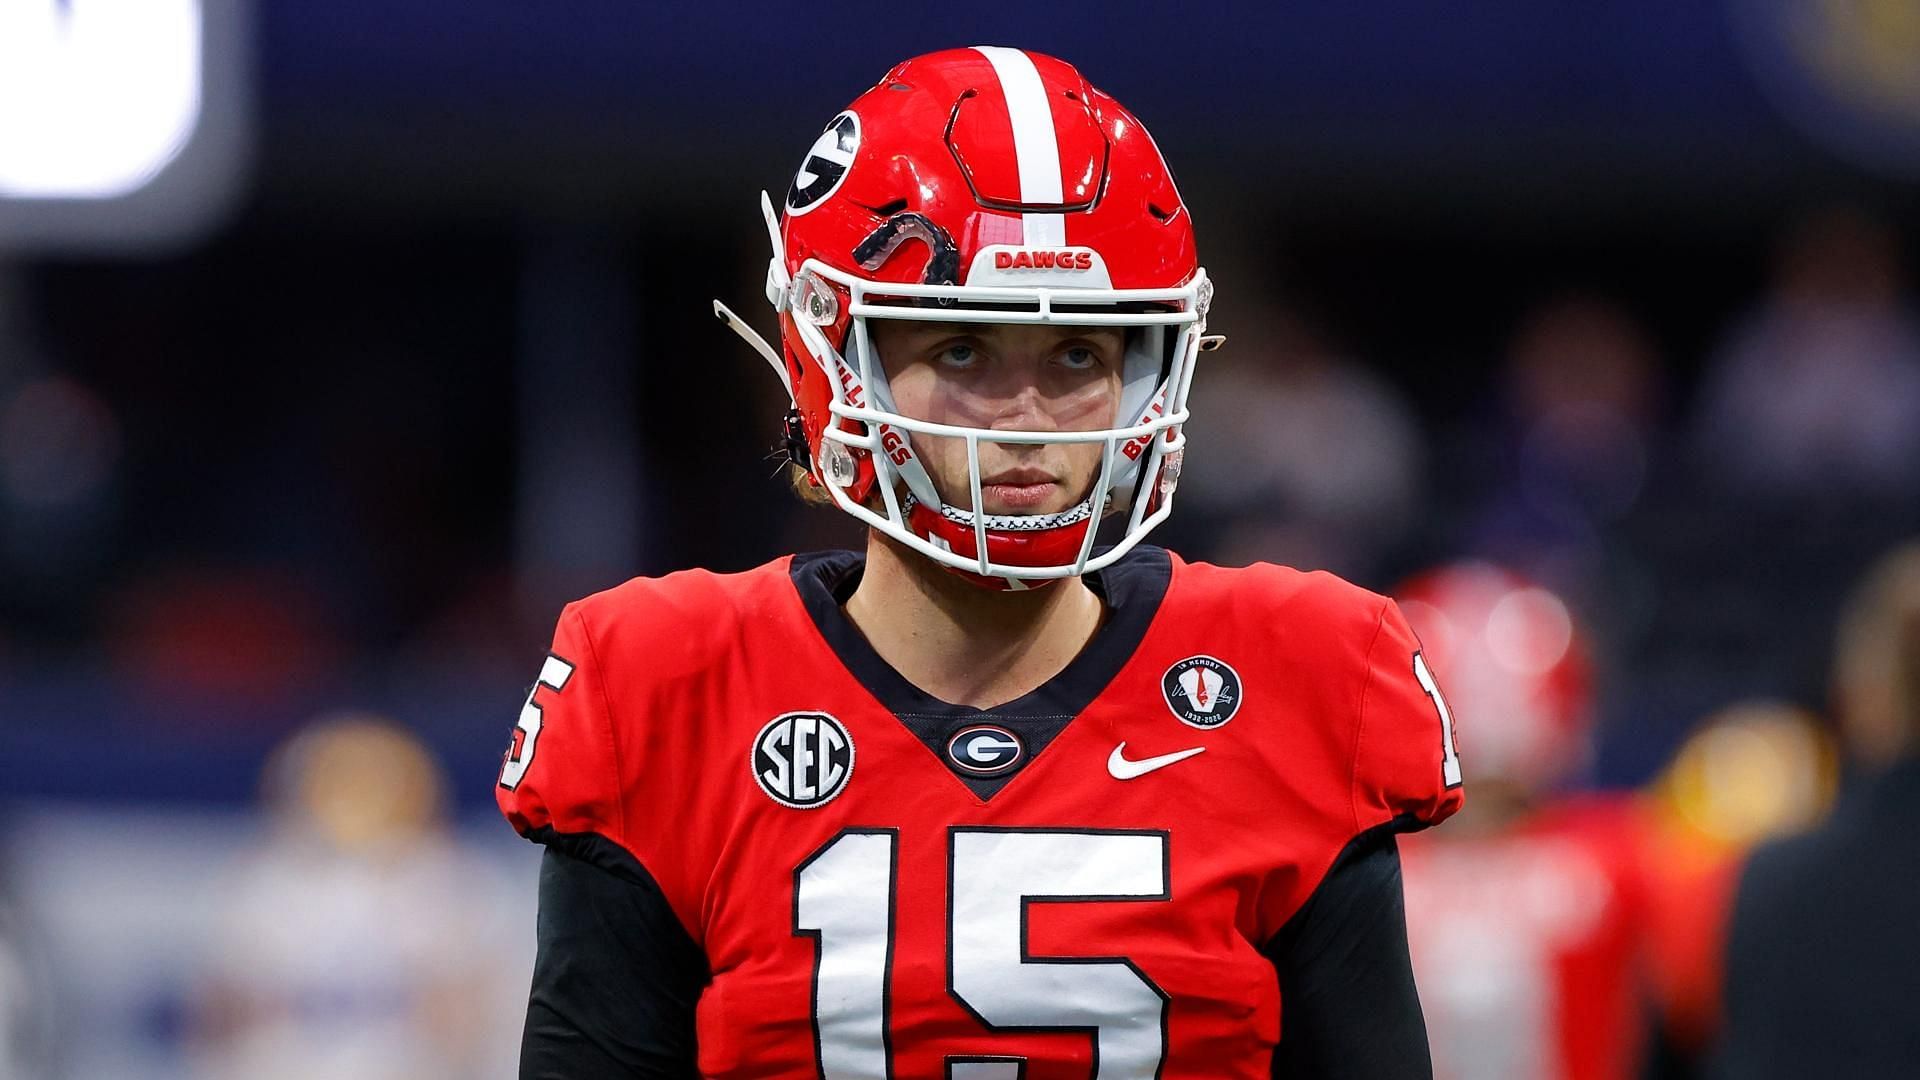 Carson Beck has kept the Georgia Bulldogs as one of the undefeated college football teams in 2023